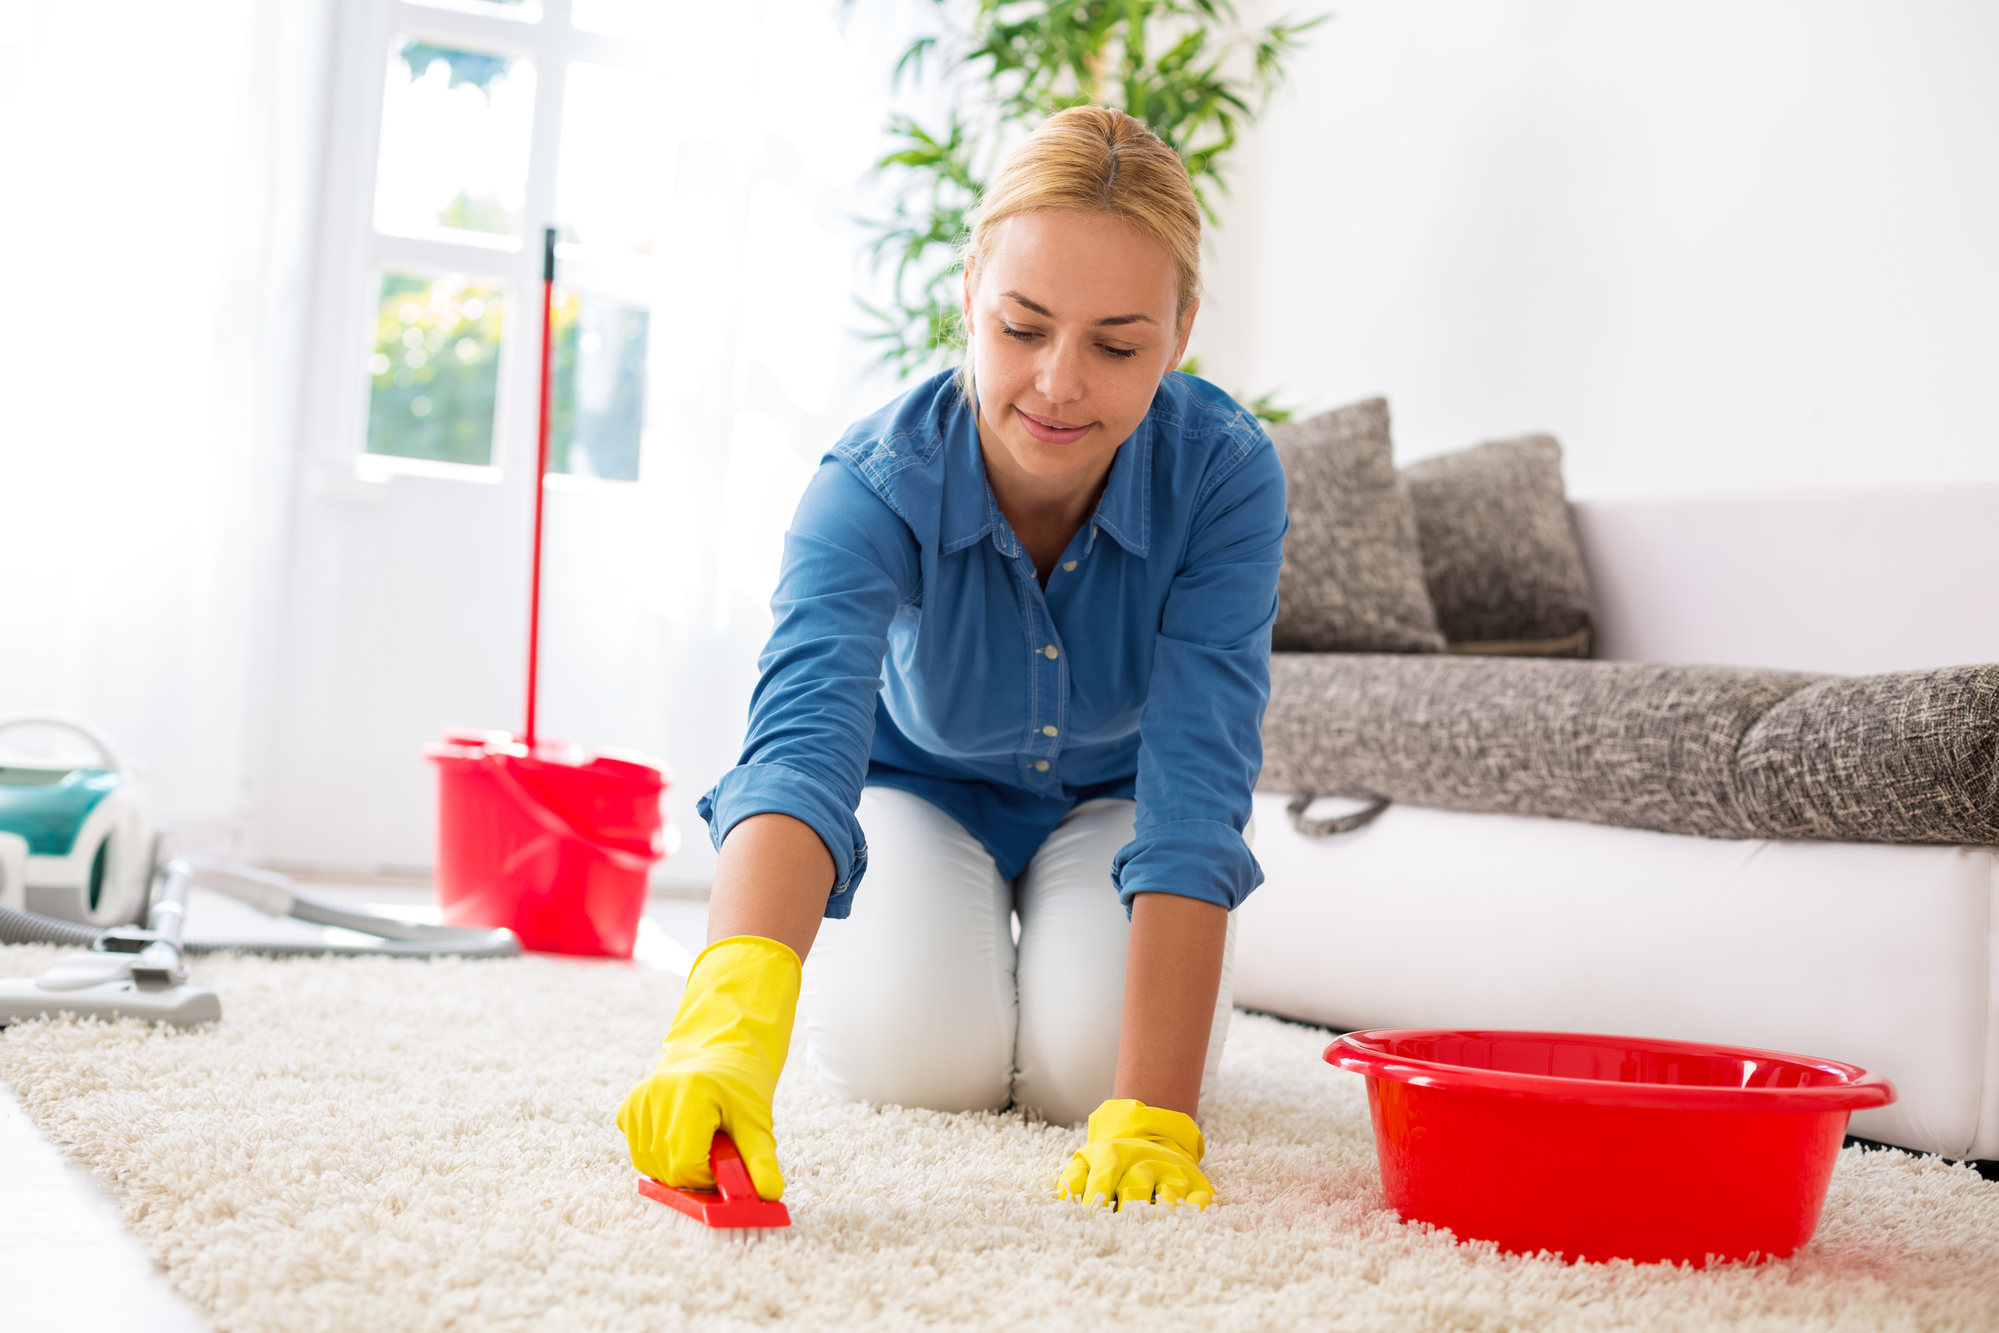 Housewife cleaning carpet with brush and doing housework